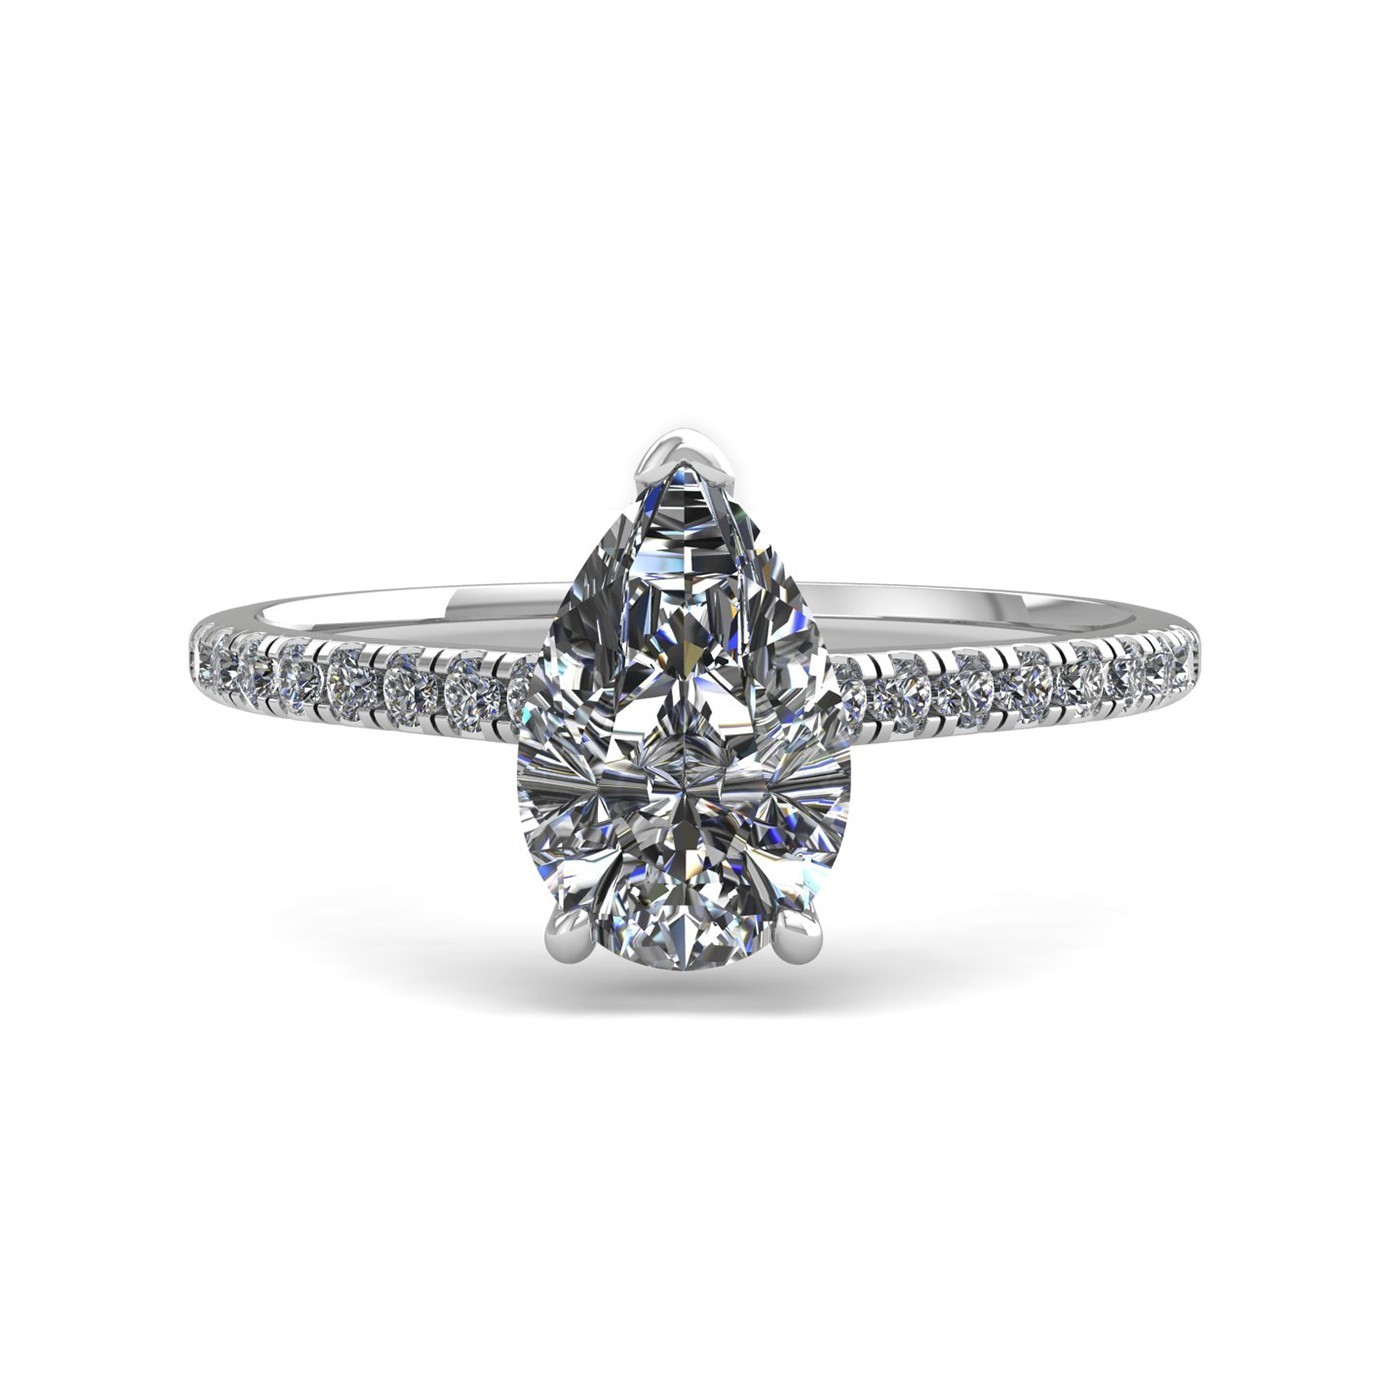 18k white gold 1.0ct 3 prongs pear diamond engagement ring with whisper thin pavÉ set band